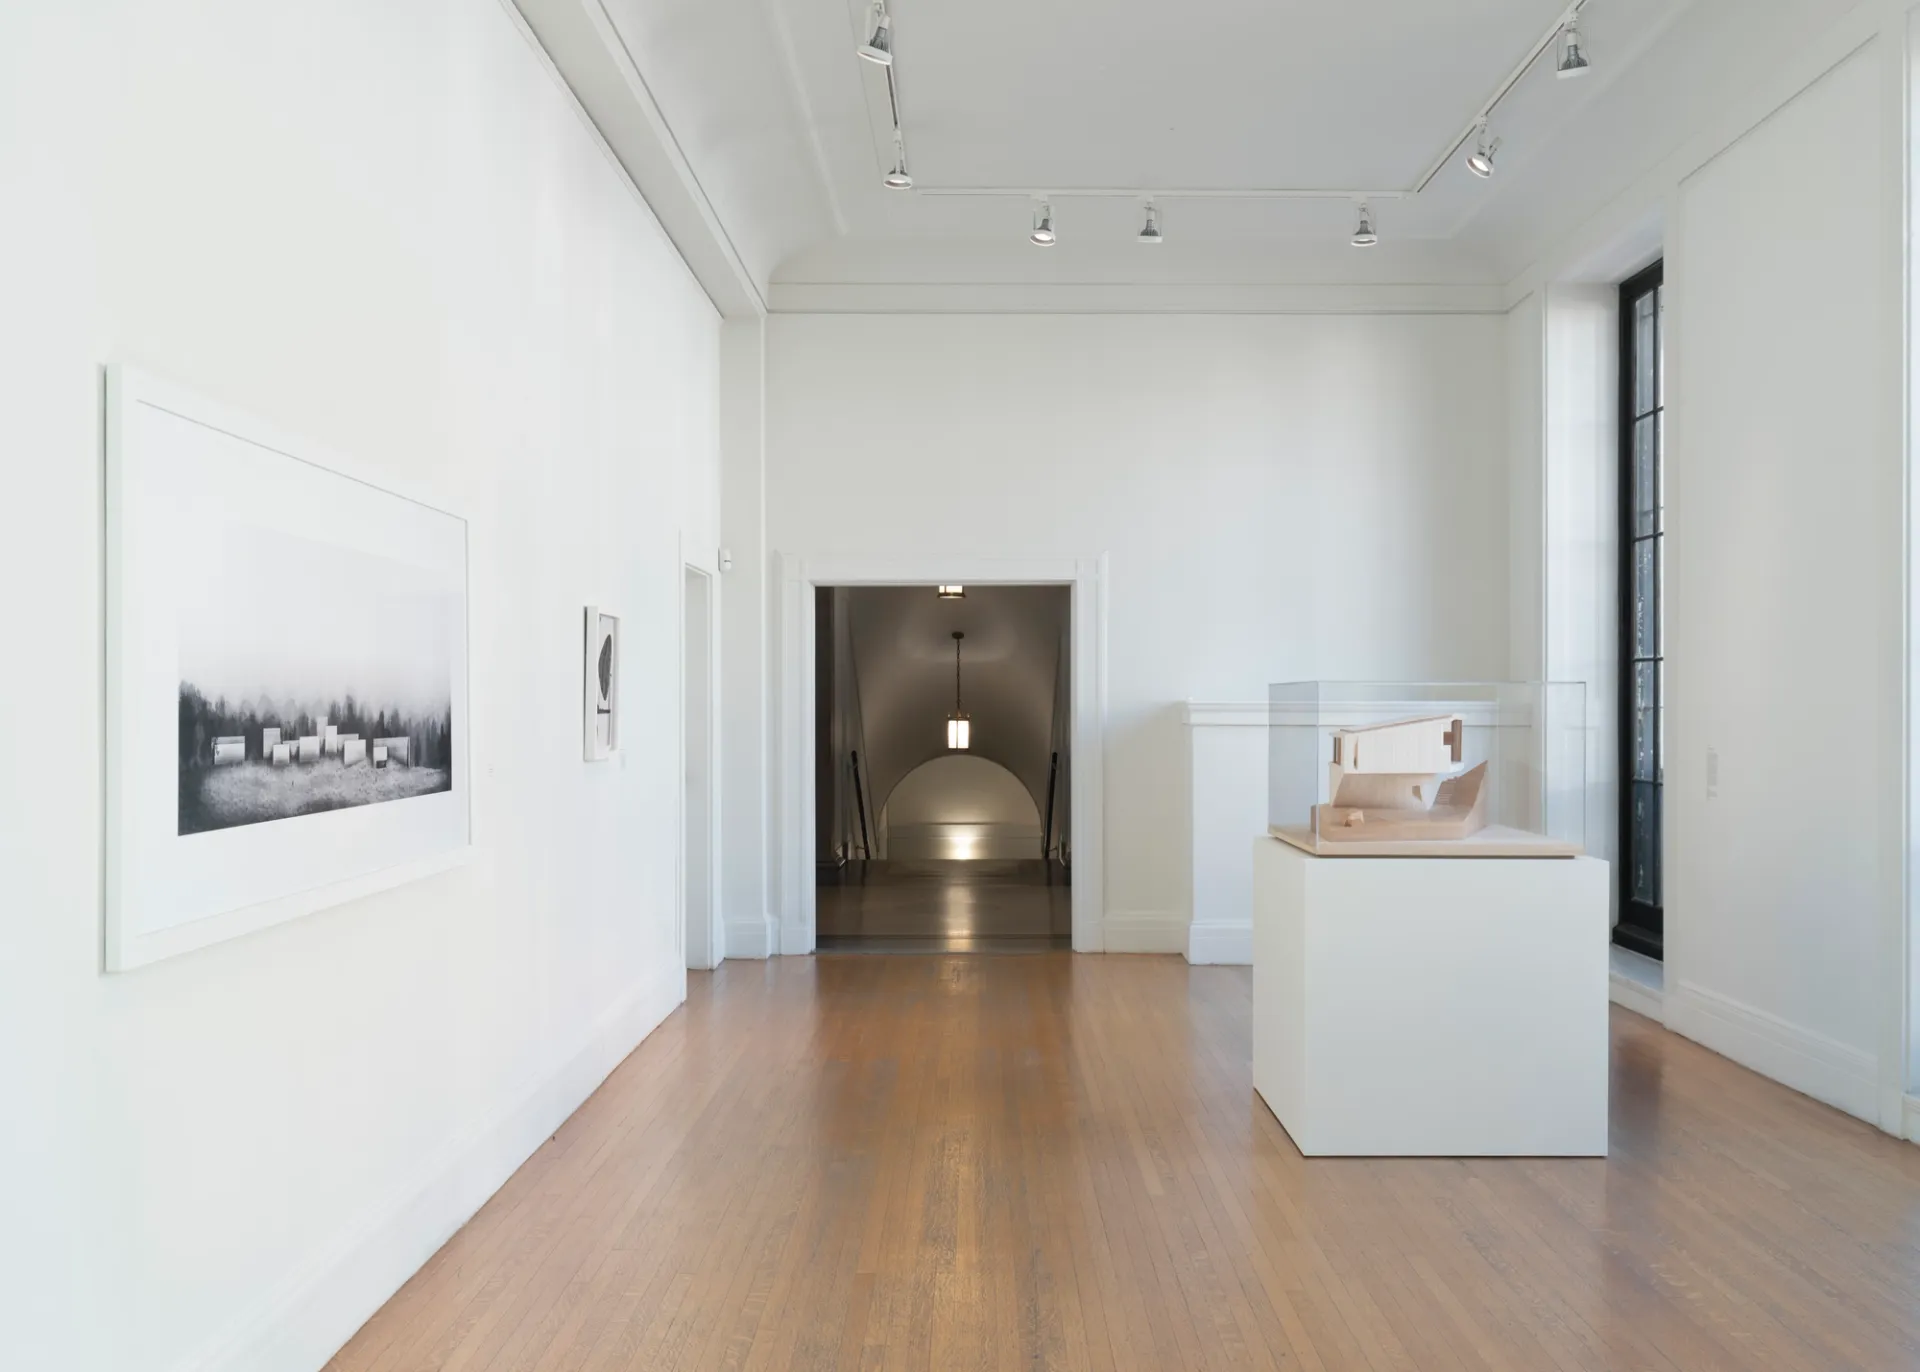 To the left, framed artwork hangs on the wall. Directly ahead, an entryway opens onto a staircase. To the right, an architectural model encased in plexi sits on a pedestal. 